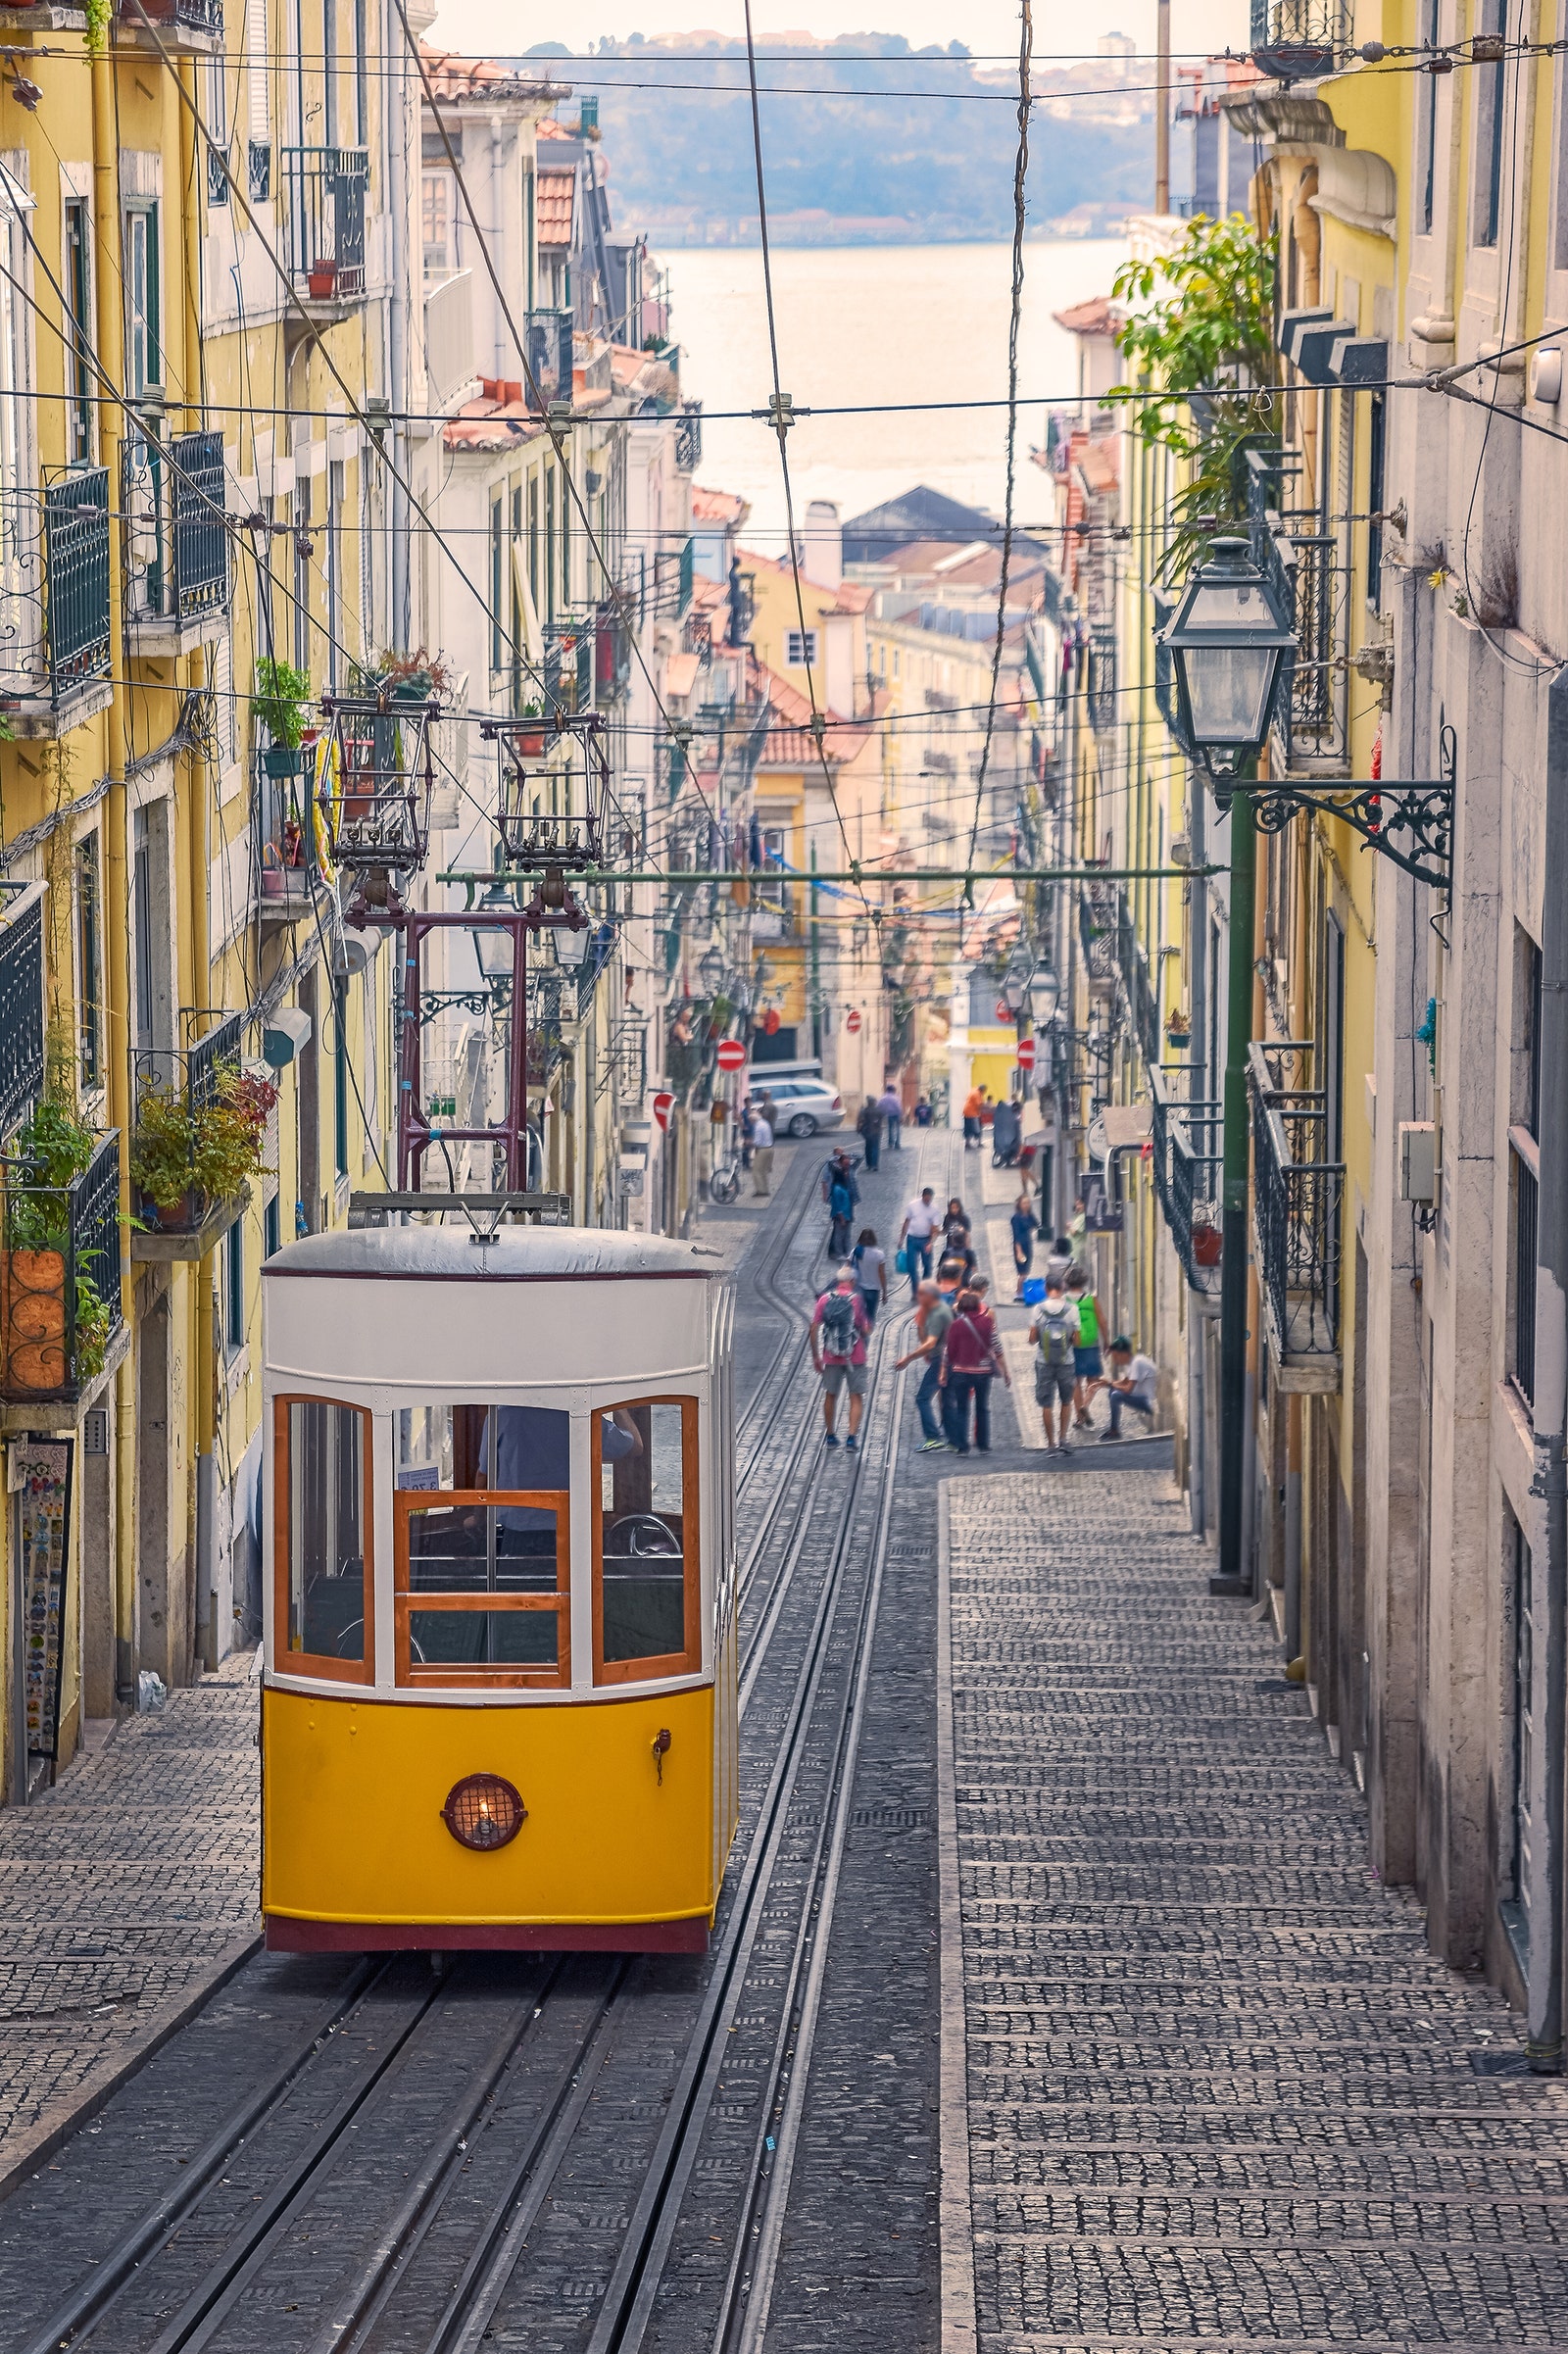 Lisboa, Portugal / Foto: dhdezvalle / Getty Images.